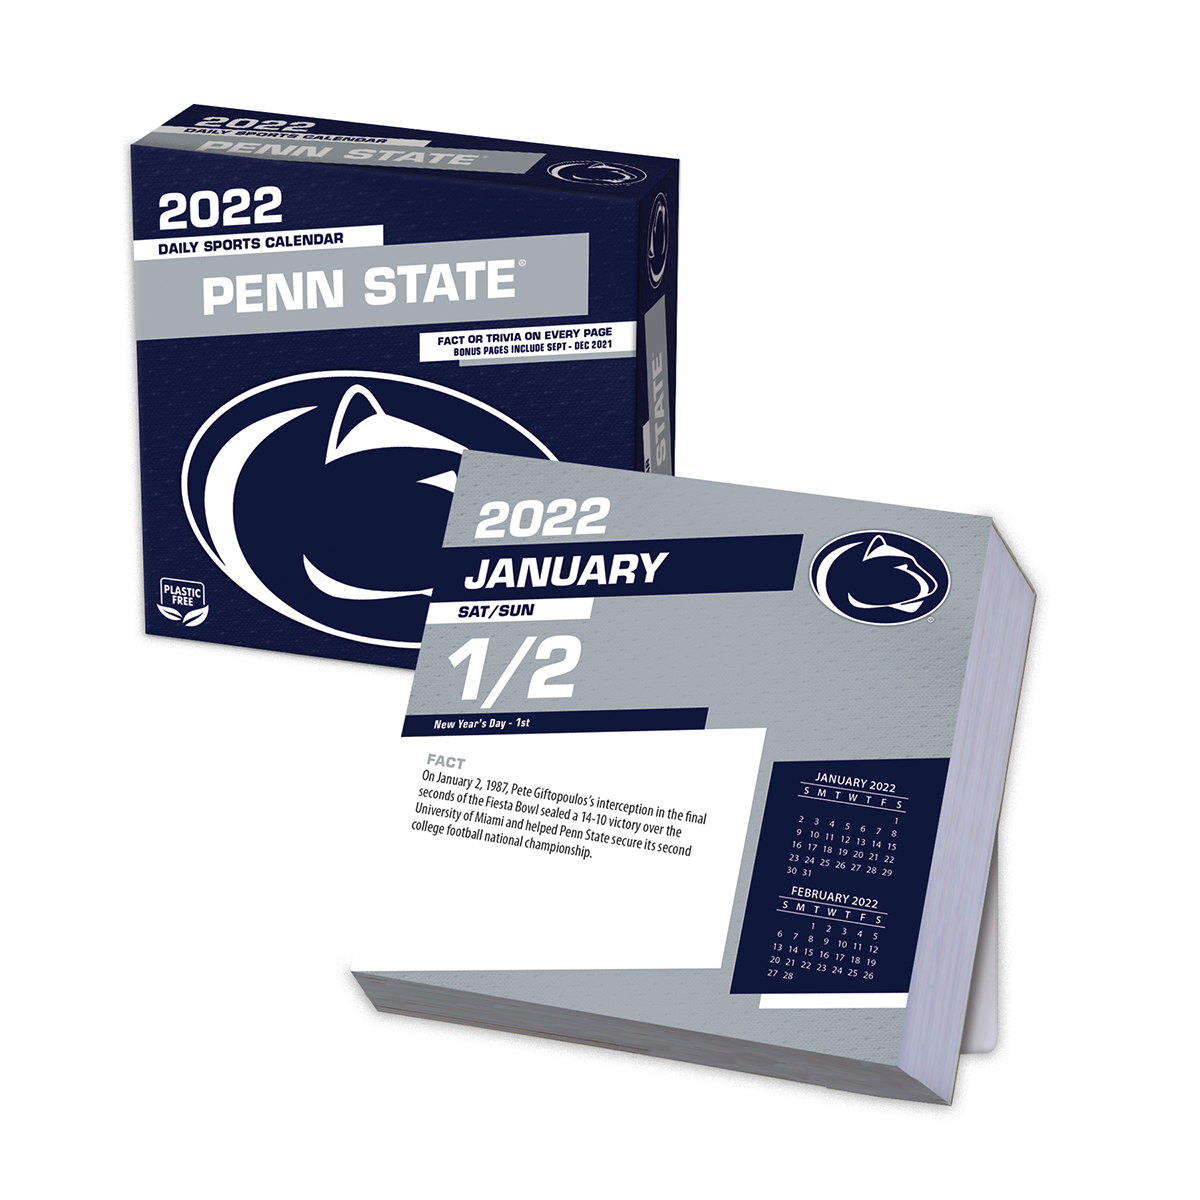 Penn State Calendar Fall 2022 Penn State Nittany Lions 2022 Page-A-Day Box Calendar - Buy At Khc Sports